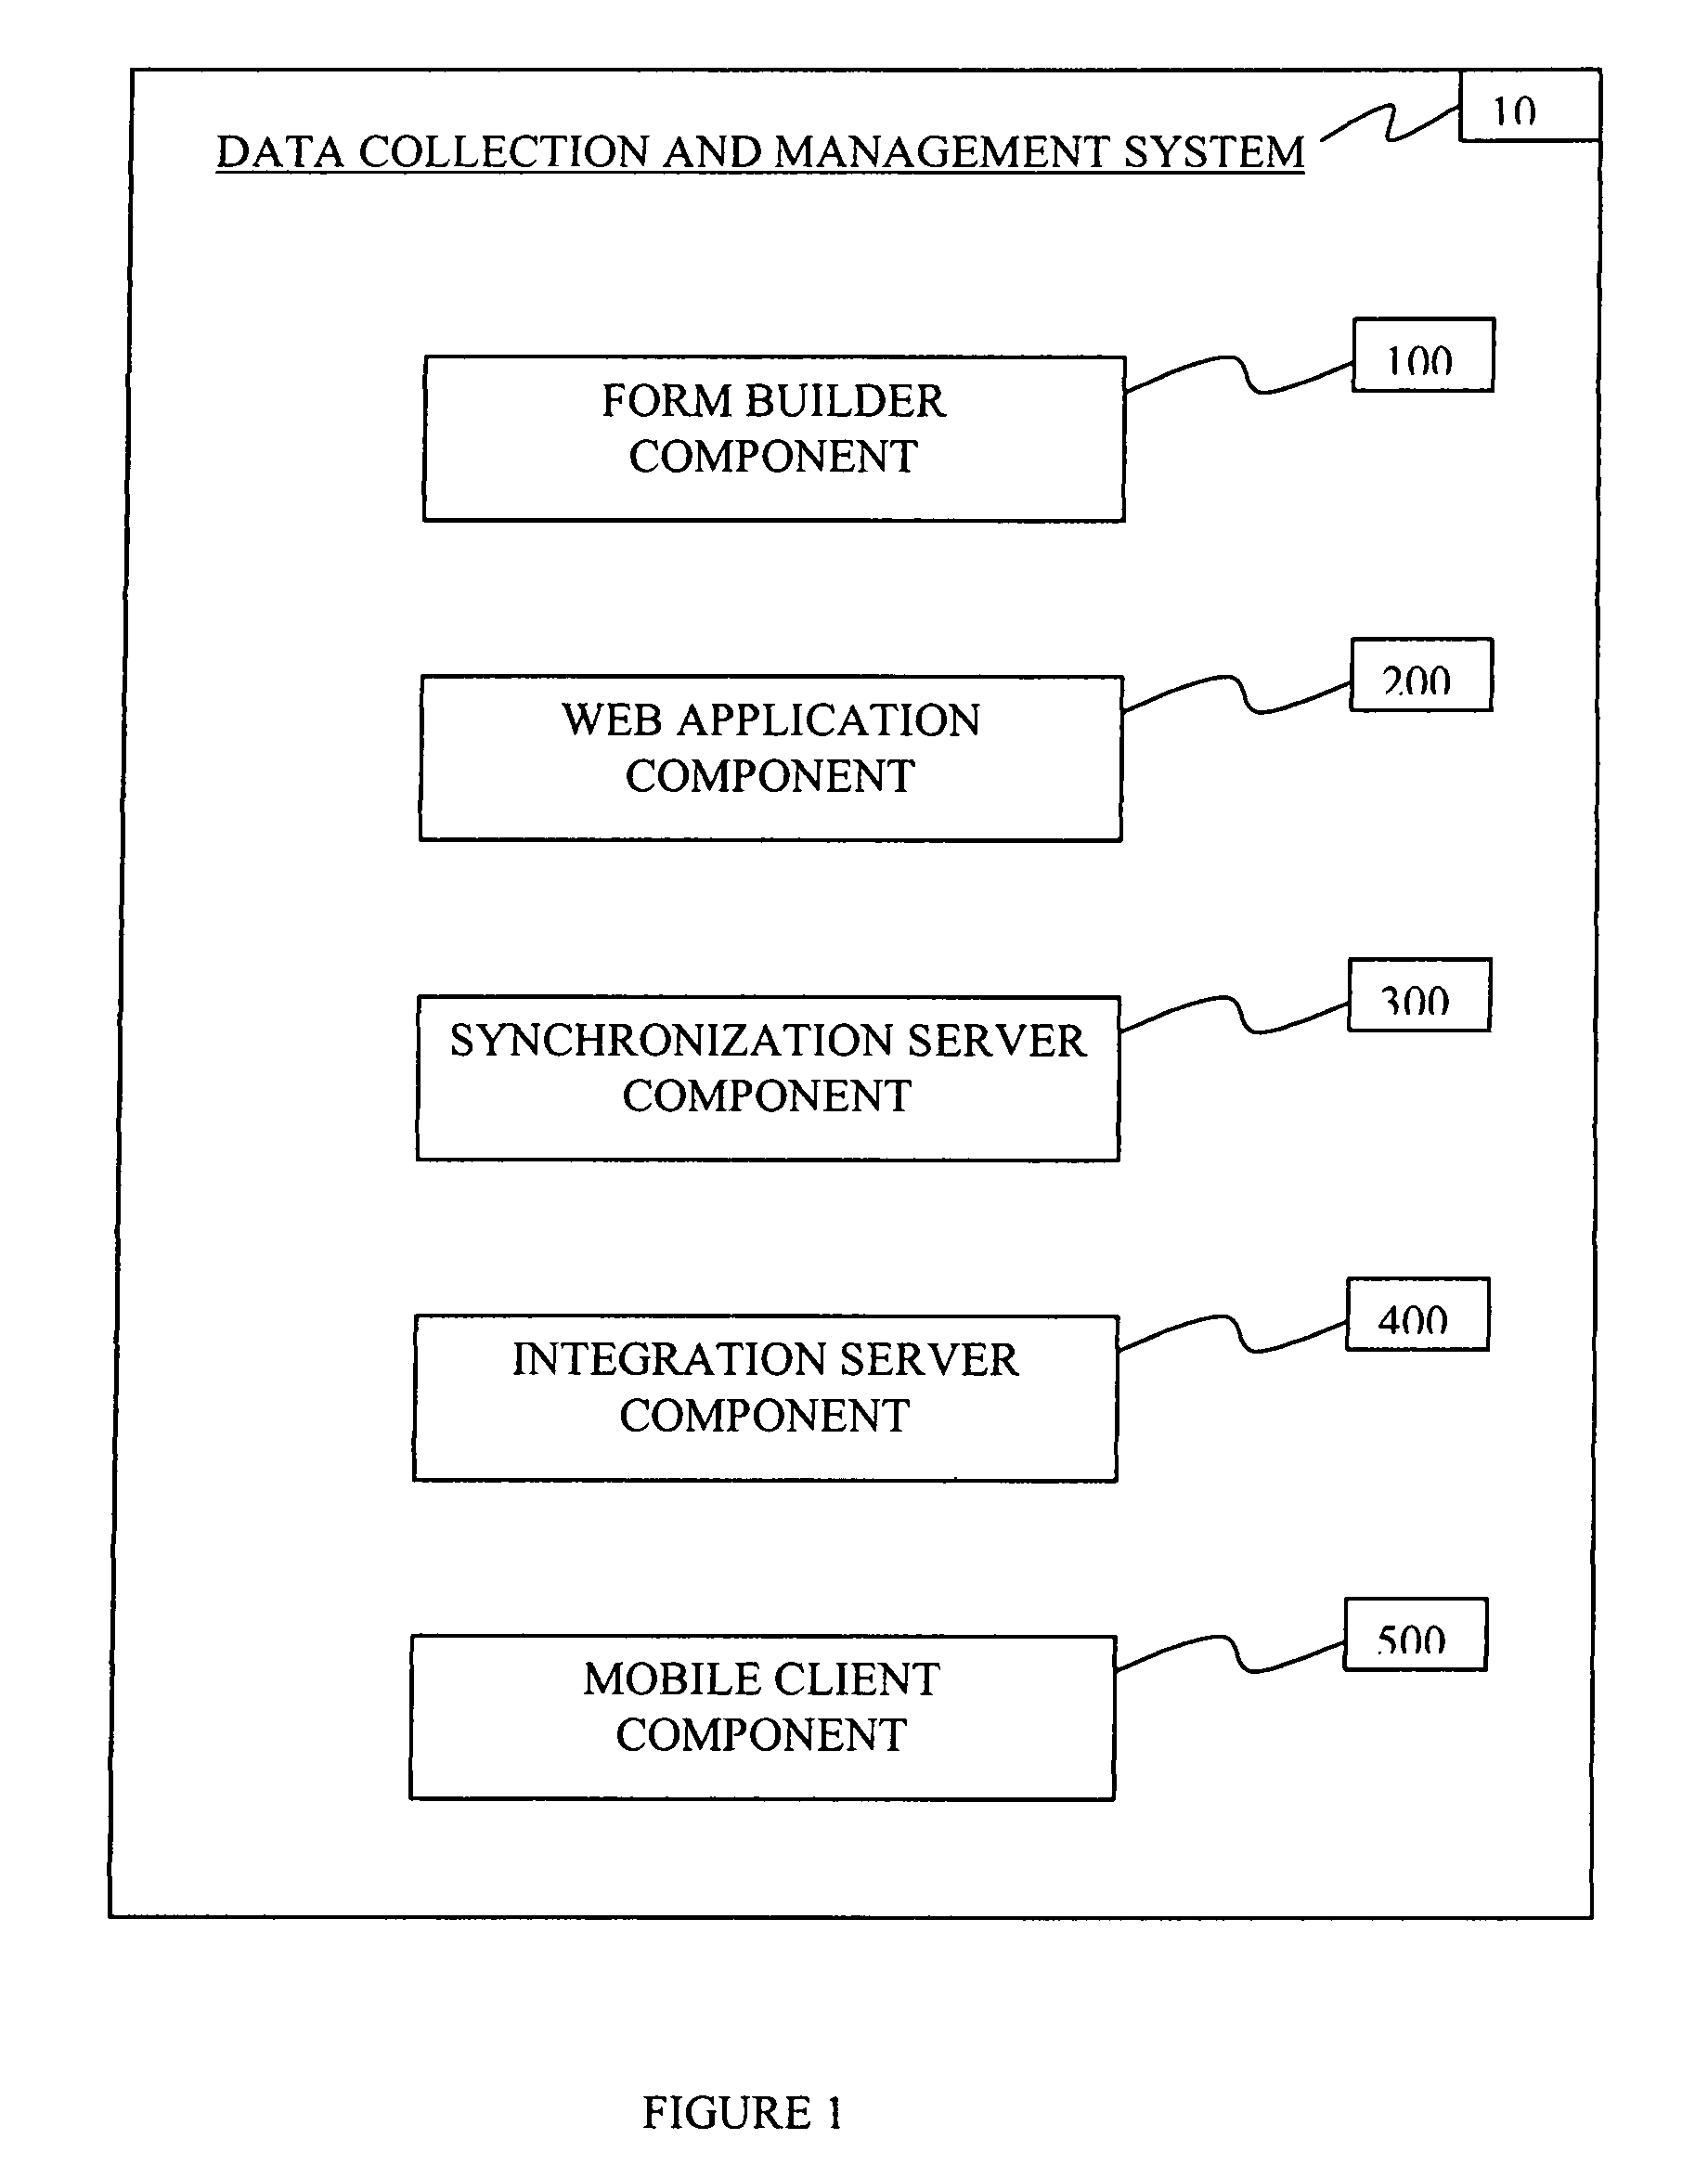 Method and apparatus for mobile data collection and management